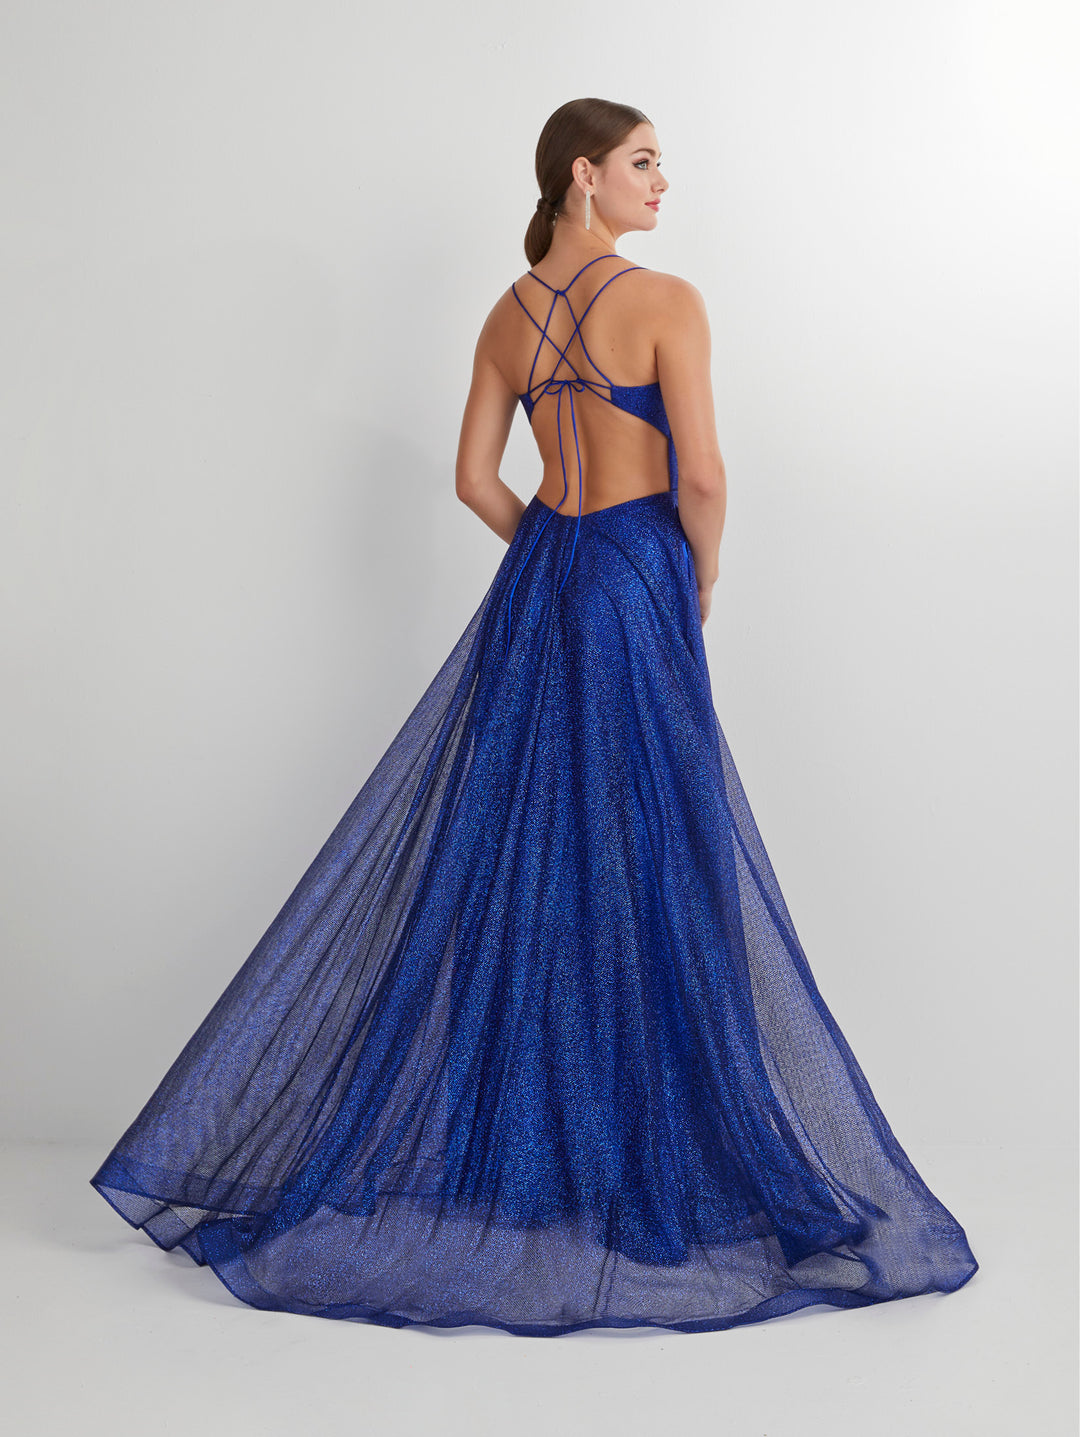 Glitter Tulle Sleeveless A-line Gown by Studio 17 12895